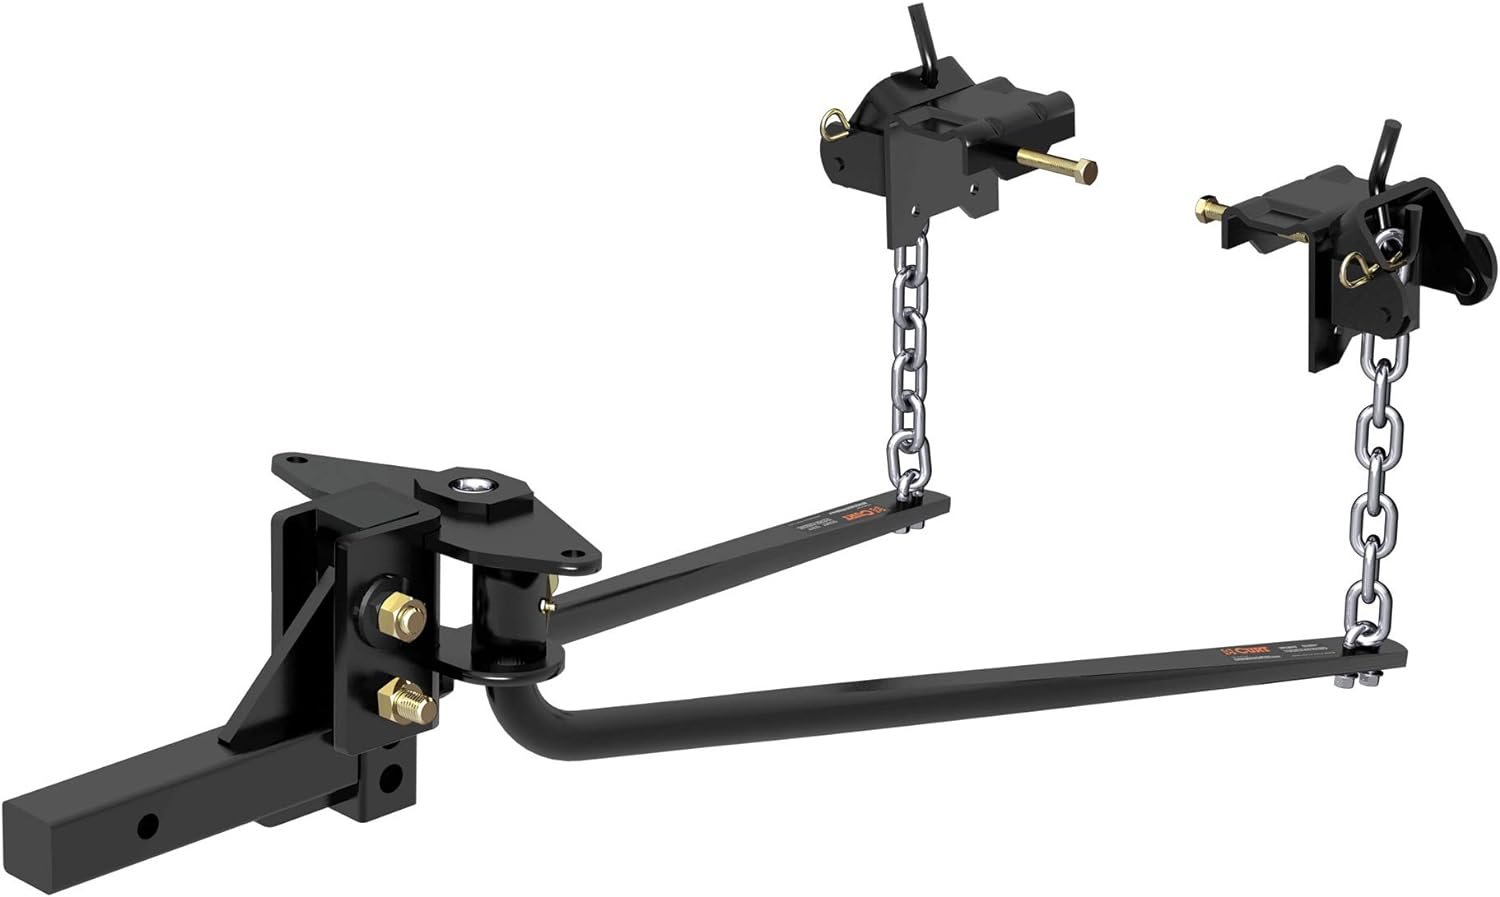 CURT 17052 Round Bar Weight Distribution Hitch Review